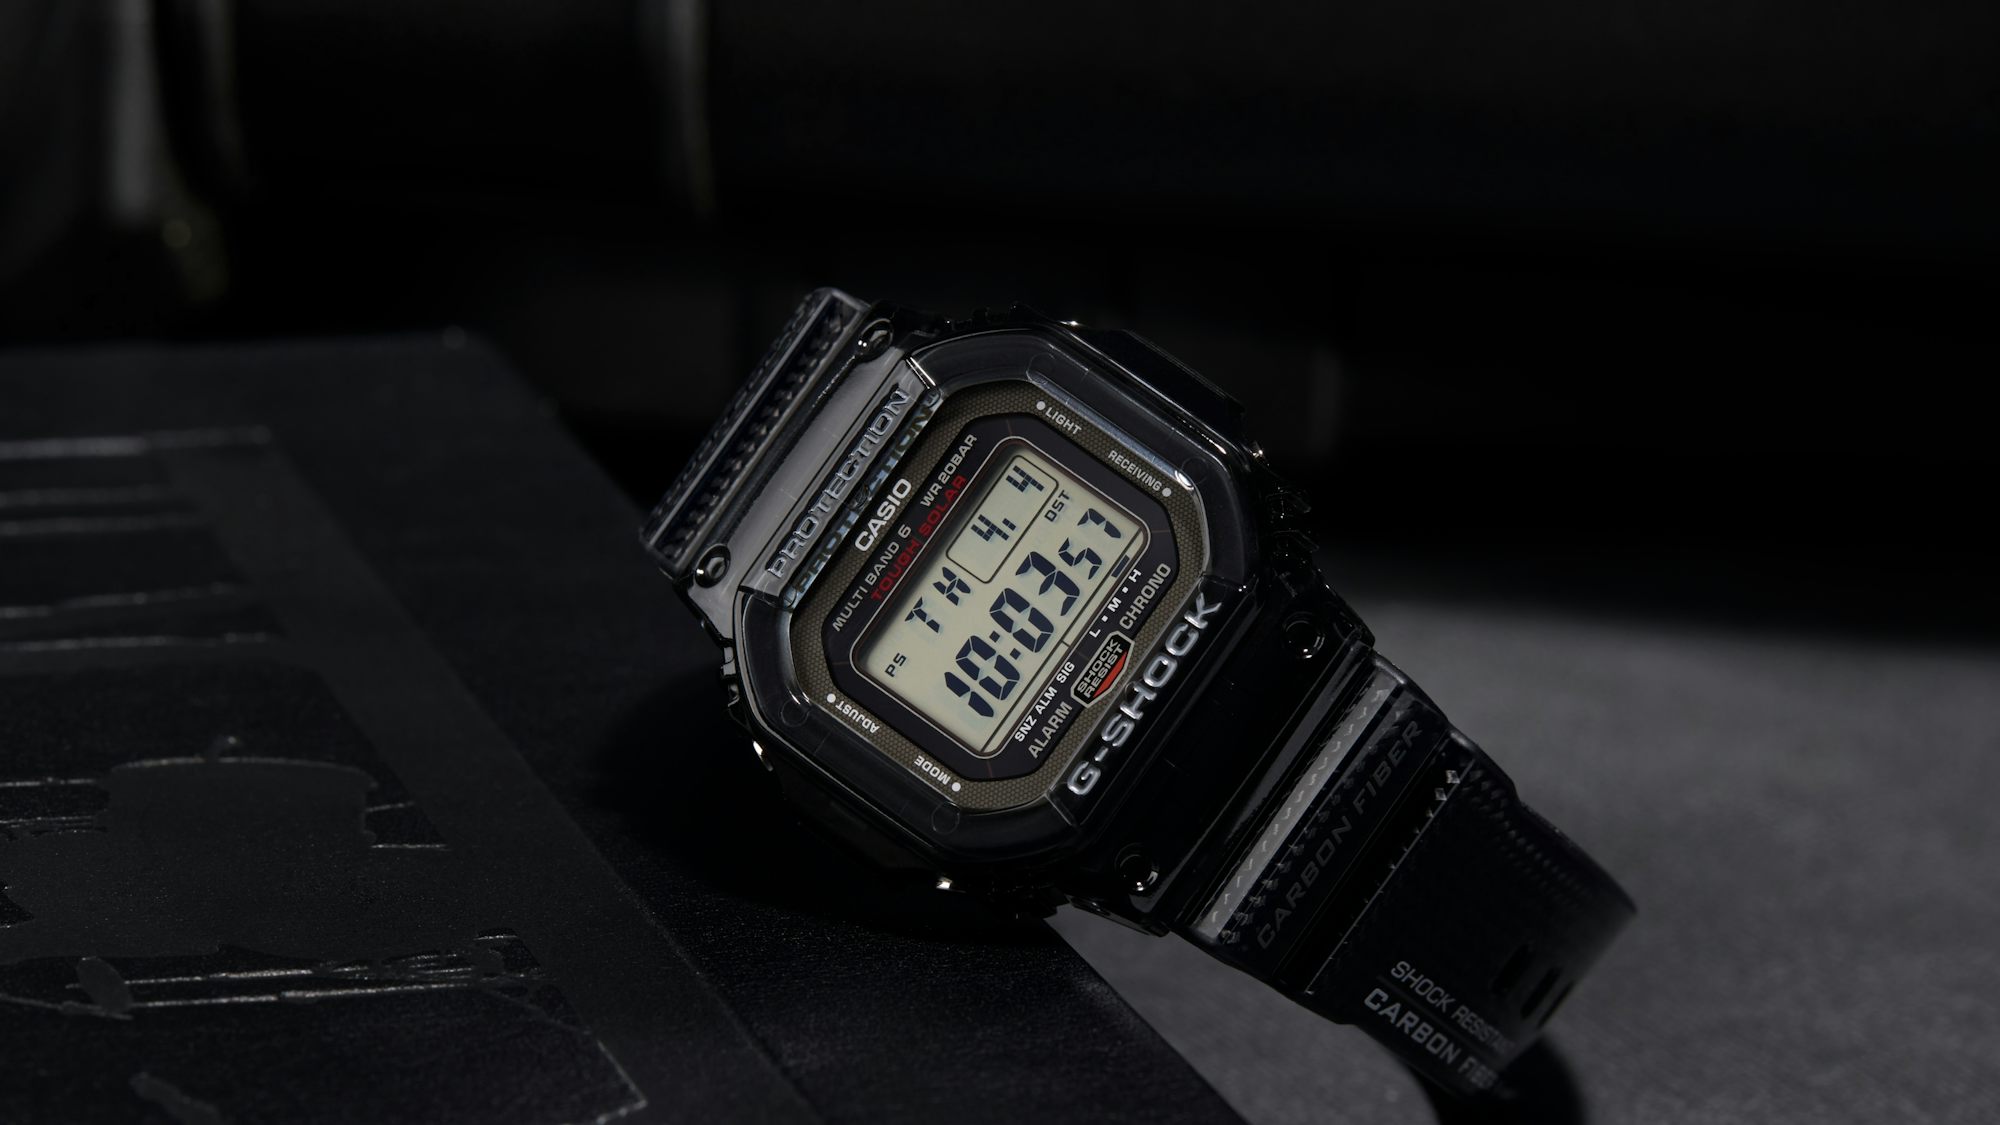 This Week In The Shop: Celebrating 41 Years Of The Original Tough Watch With A Deep Dive Into G-Shock